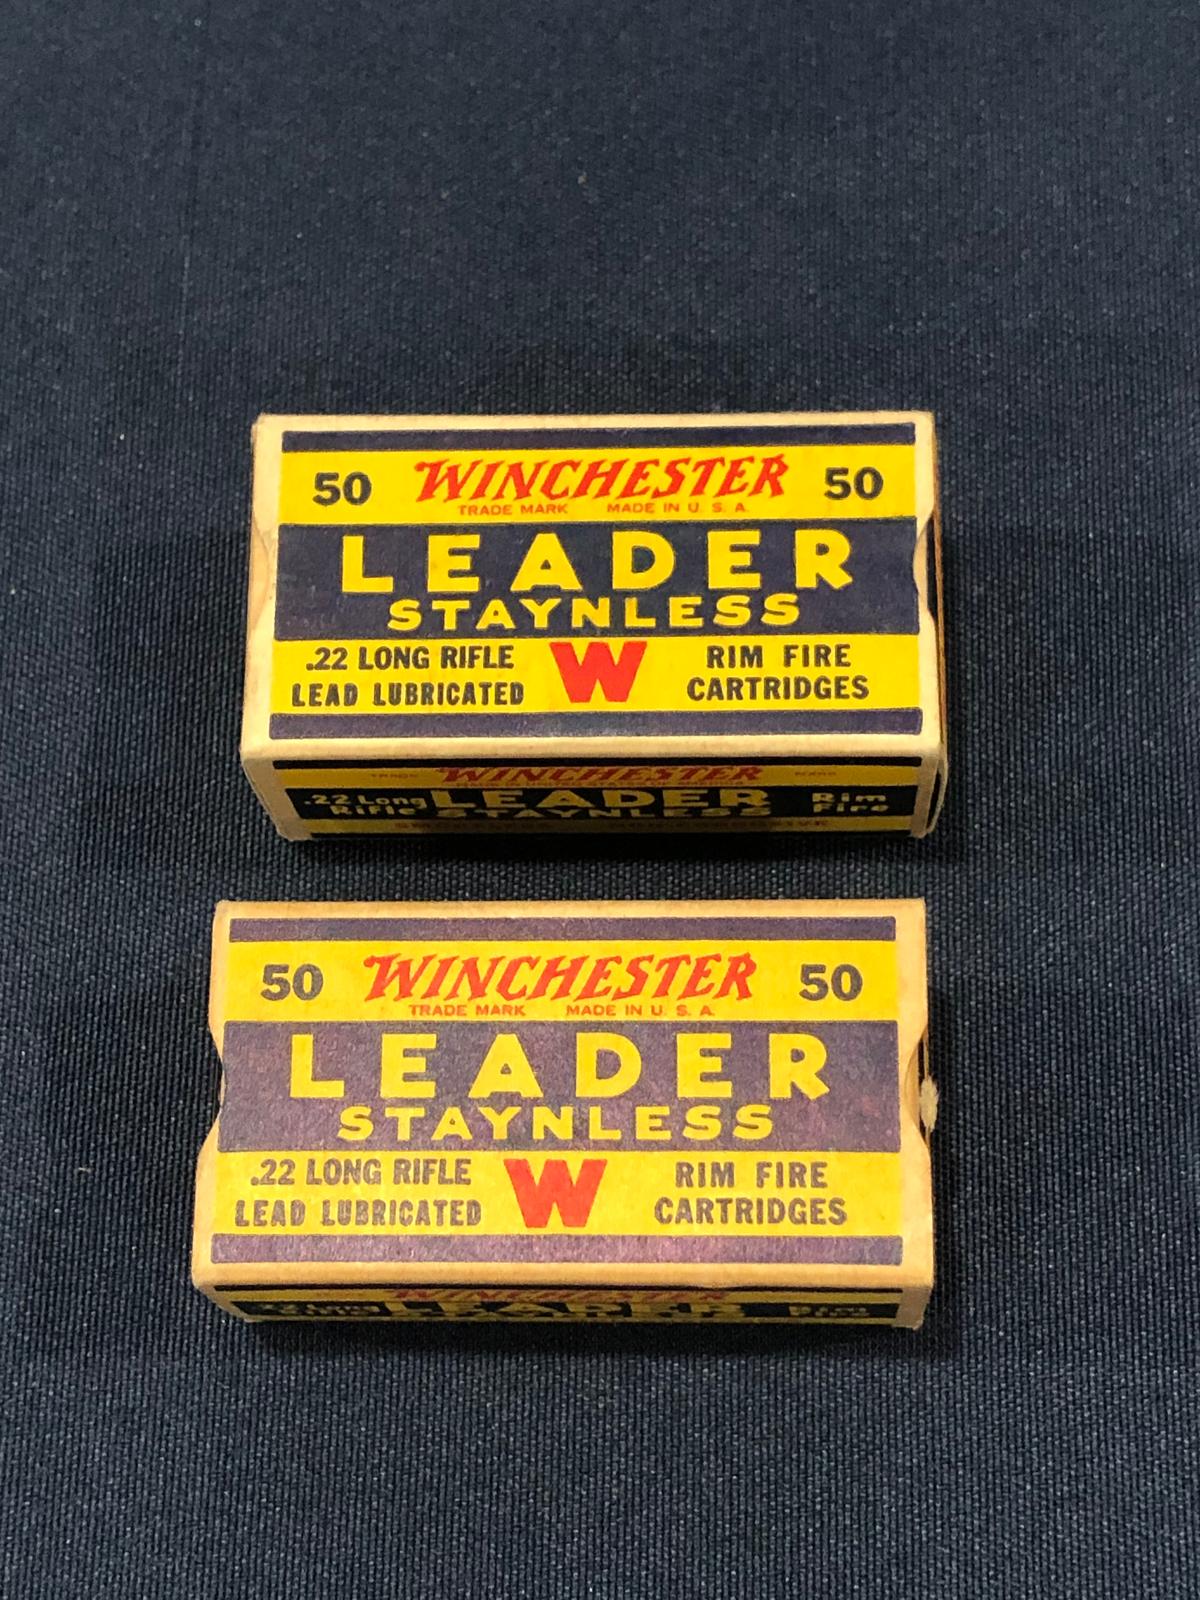 (2) VINTAGE WINCHESTER LEADER STAYNLESS .22 LONG RIFLE CARTRIDGES